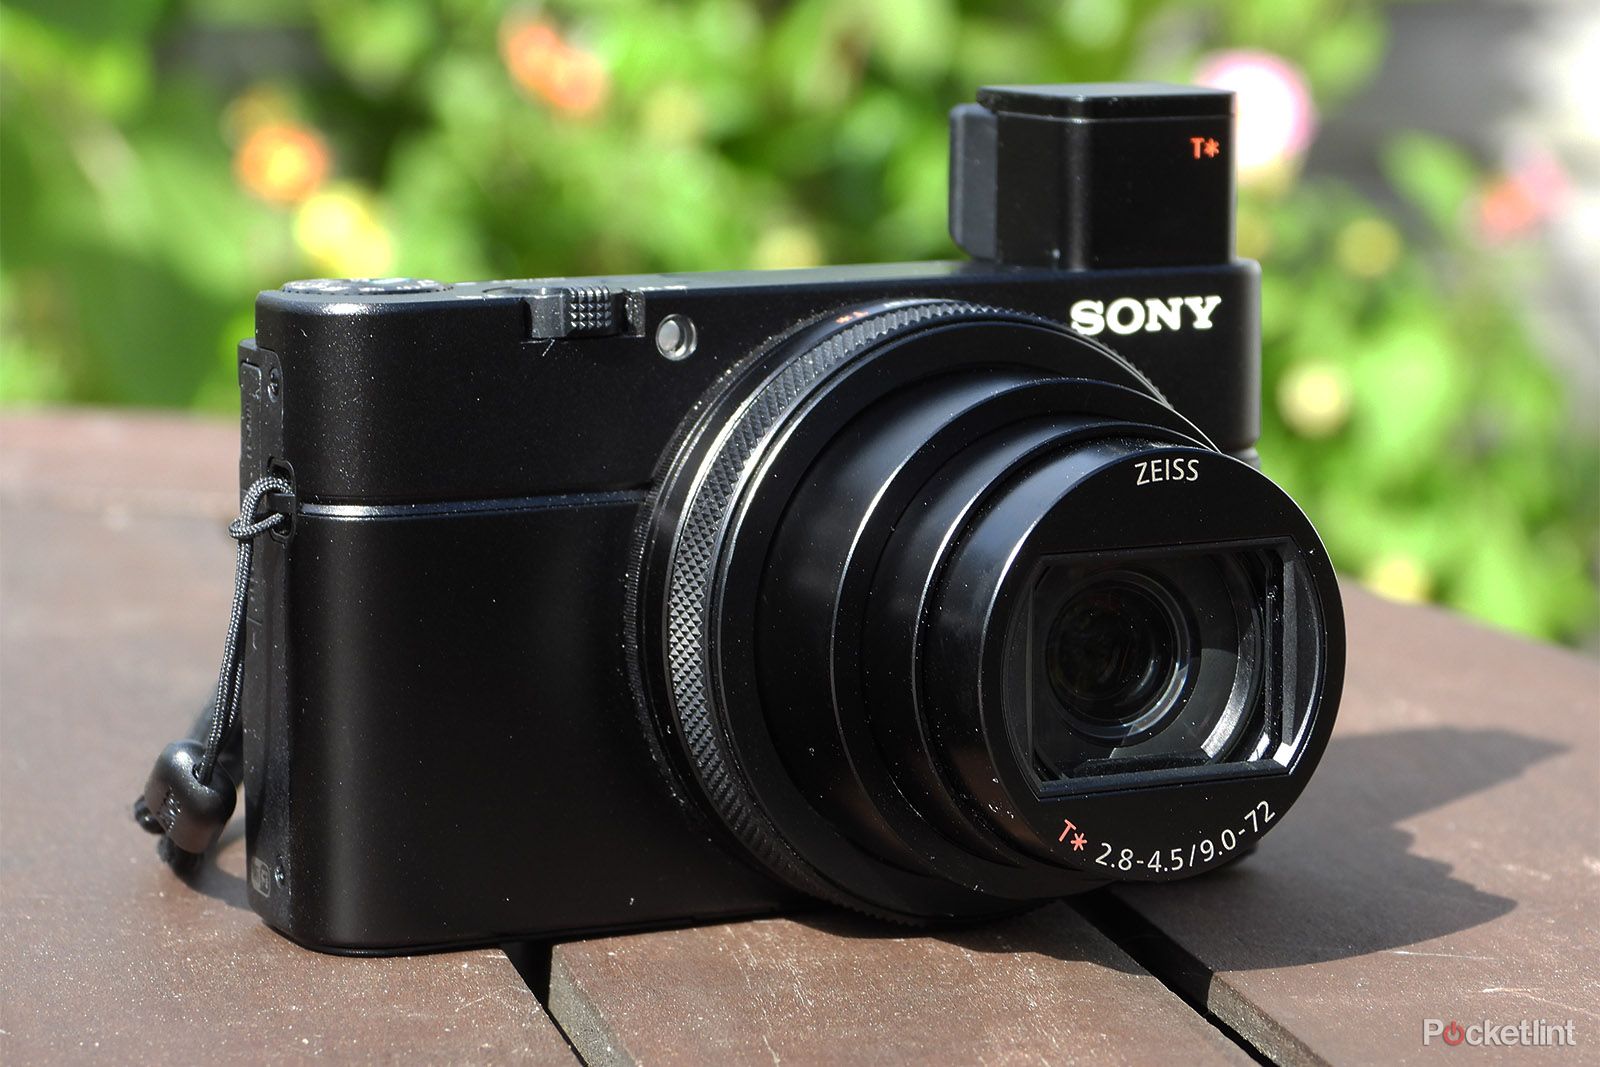 Sony RX100 M6 review: An unrivalled compact camera